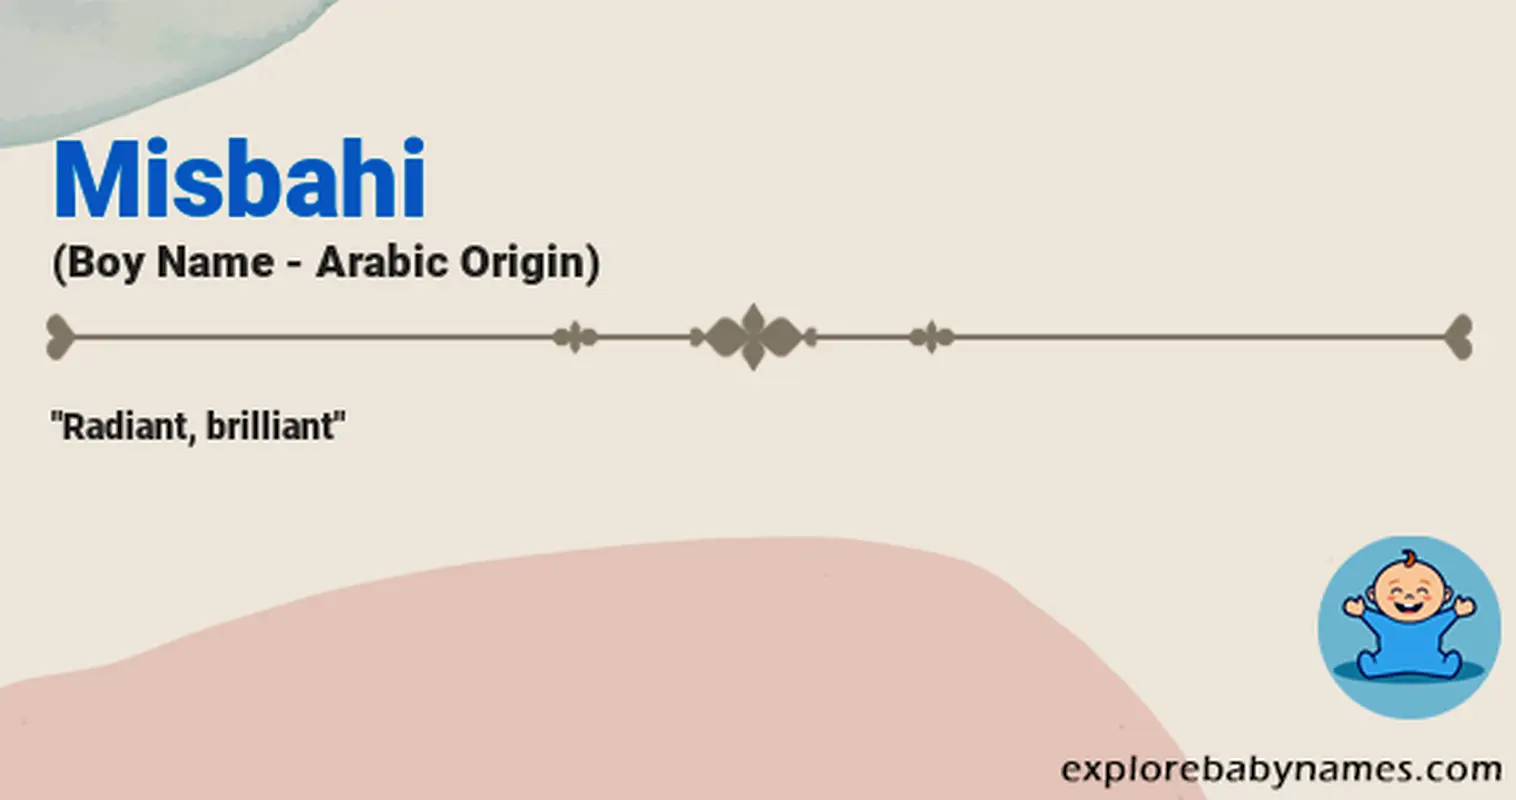 Meaning of Misbahi